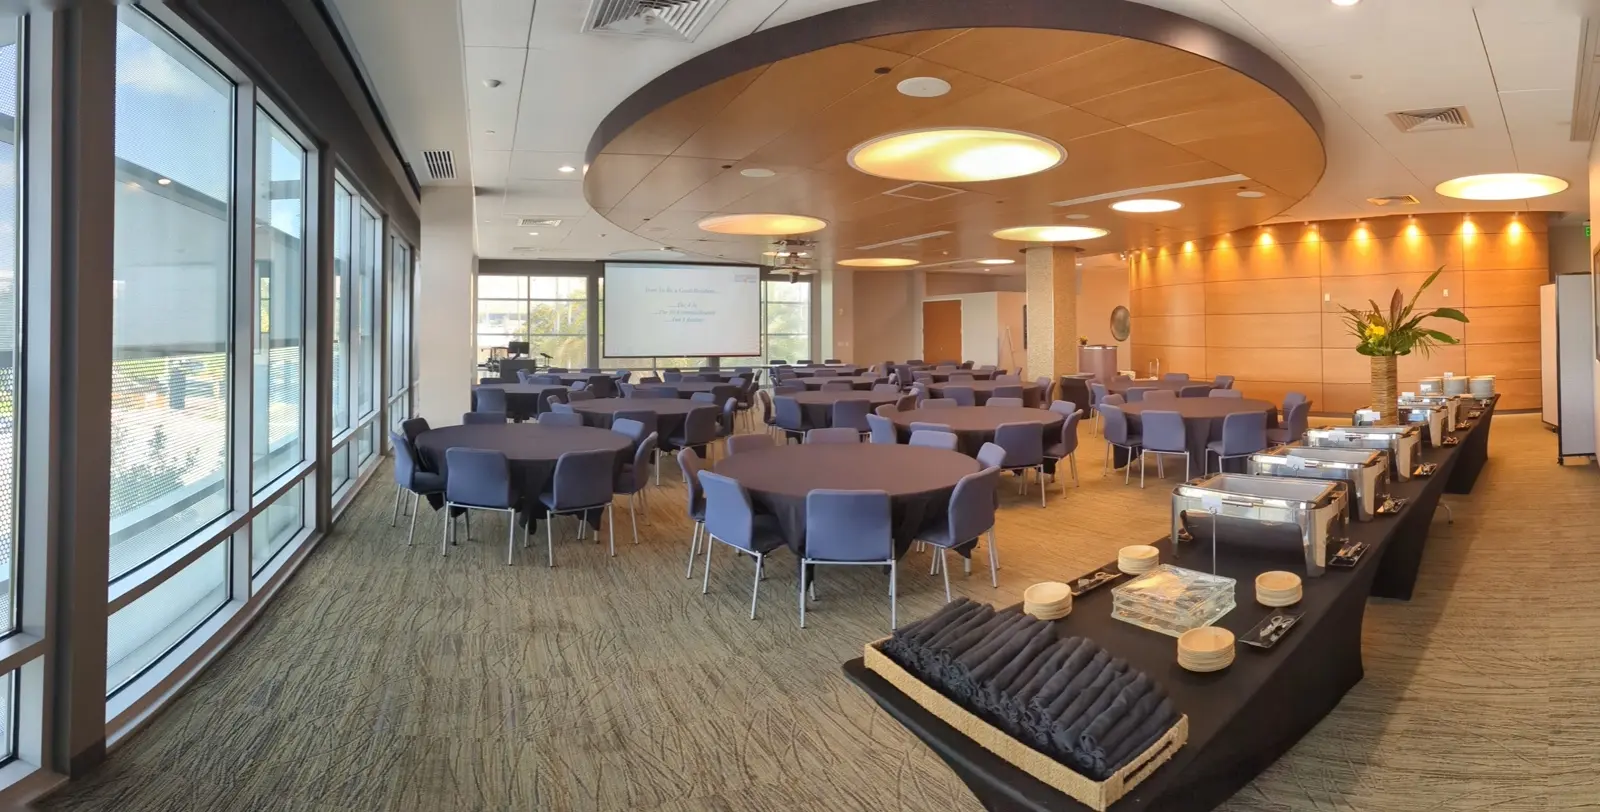 CAMLS A modern conference room with large windows, circular chandeliers, round tables with blue chairs, and a buffet table to the right. A projector screen is visible at the front of the room. The setup is ready for an event or meeting.